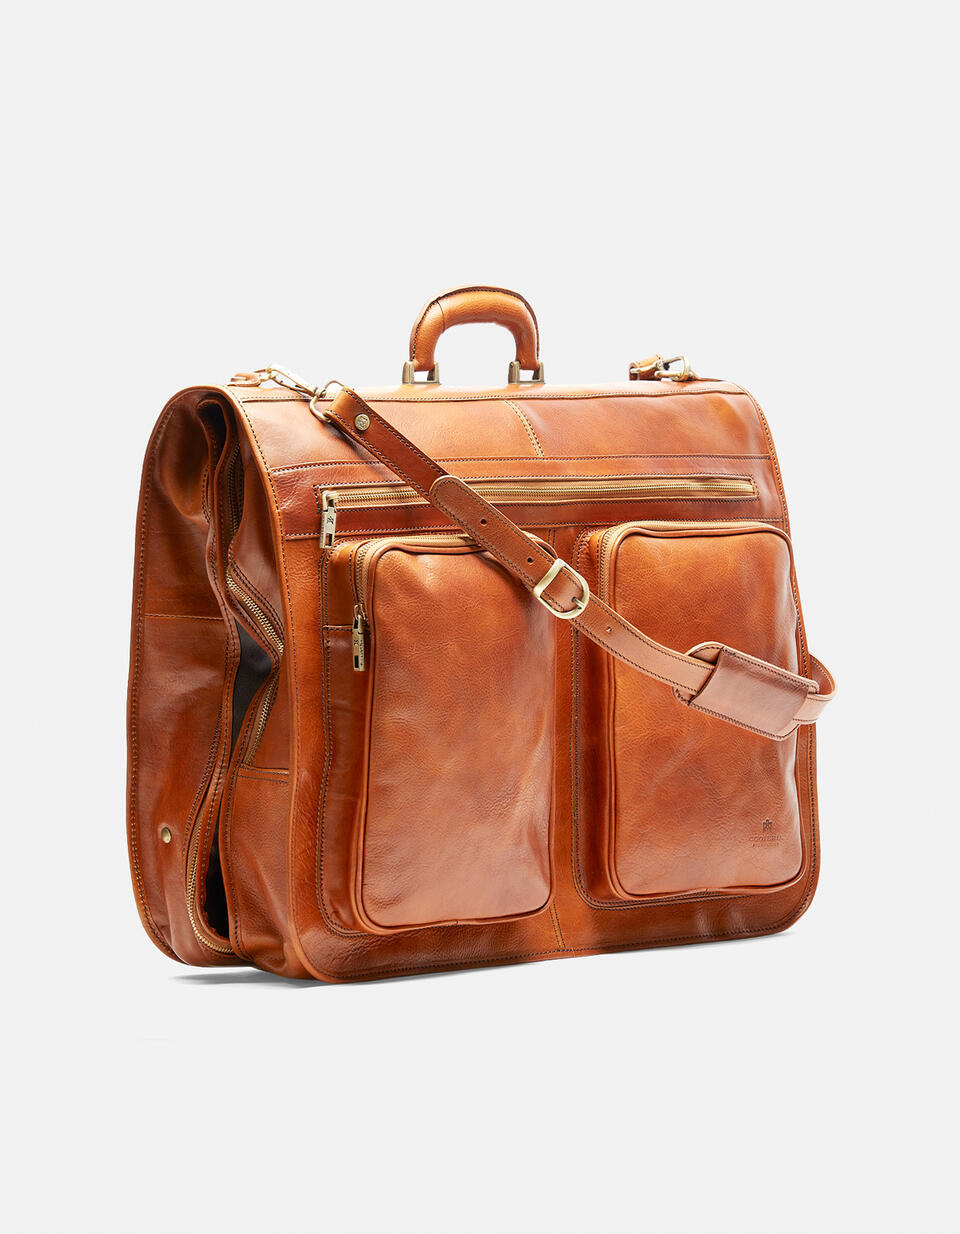 Oxford travel garment bag in vegetable tanned leather - Luggage | TRAVEL BAGS COGNAC - Luggage | TRAVEL BAGSCuoieria Fiorentina